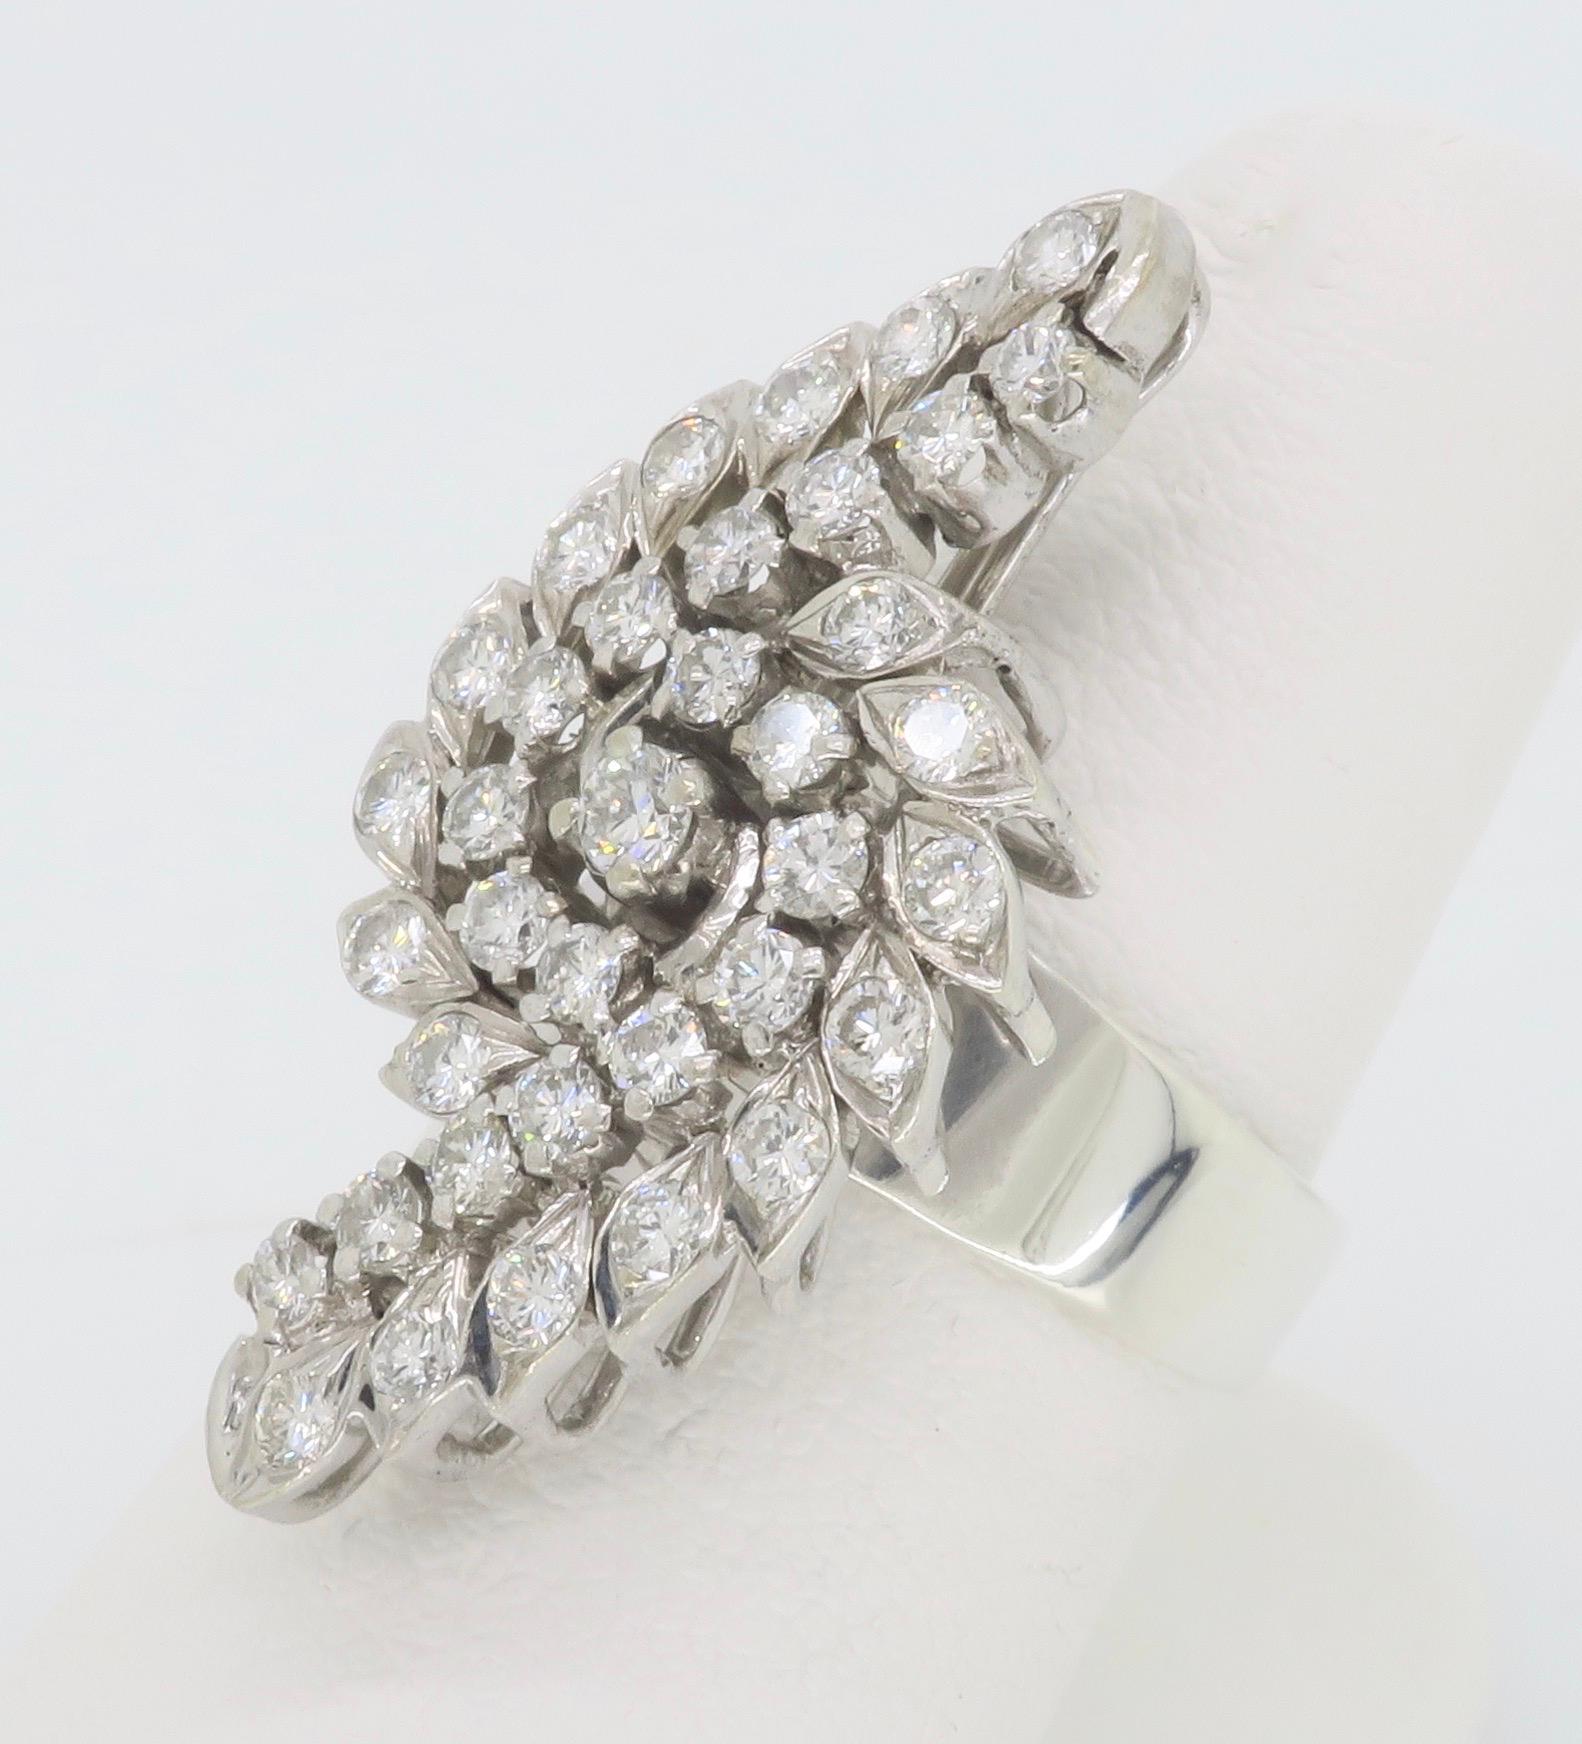 Diamond Cocktail Ring Crafted in 90% Silver In Excellent Condition For Sale In Webster, NY